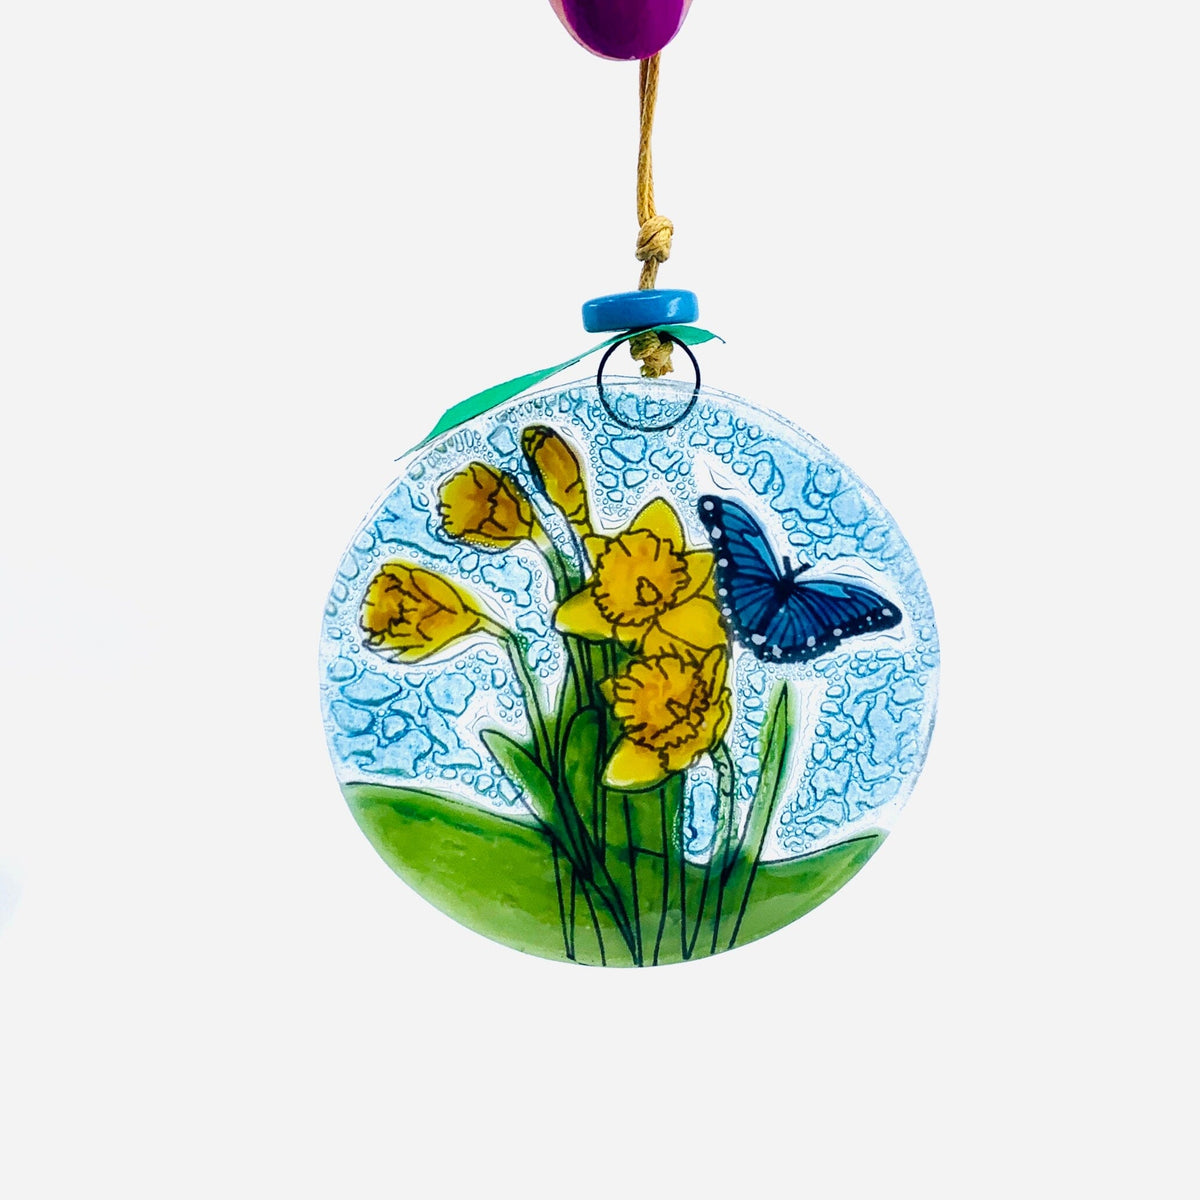 Fair Trade Ornament 154 Butterfly and Daffodils Ornament Pam Peana 